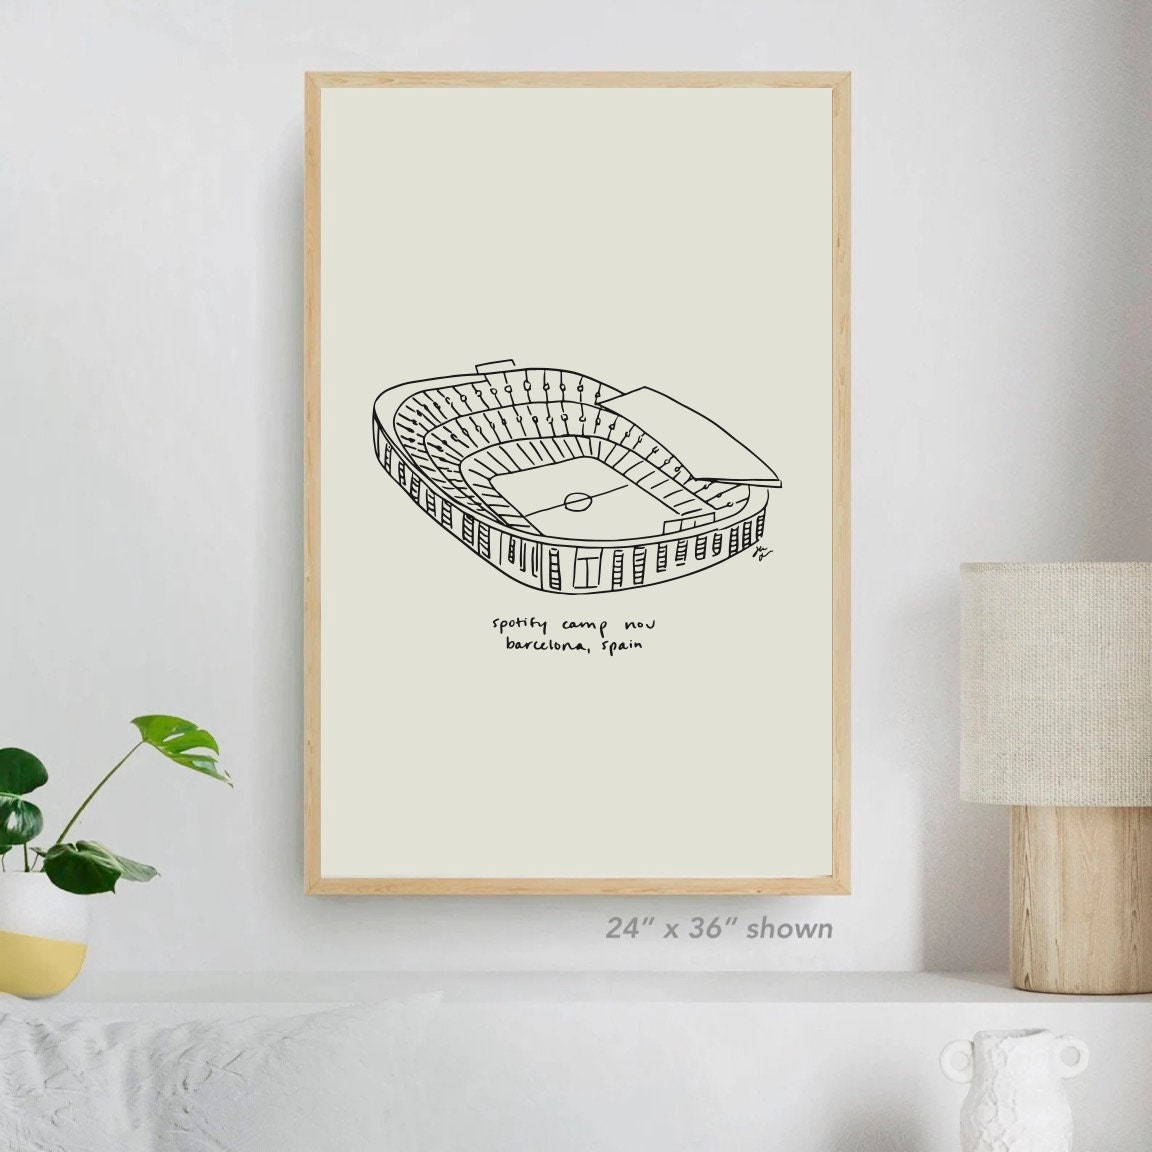 Spotify Camp Nou Barcelona Spain Soccer Stadium, La Liga Club FC Barcelona  Fan, La Liga Club FC Fan Poster Painting Spain, Camp Nou Drawing - Etsy | Poster